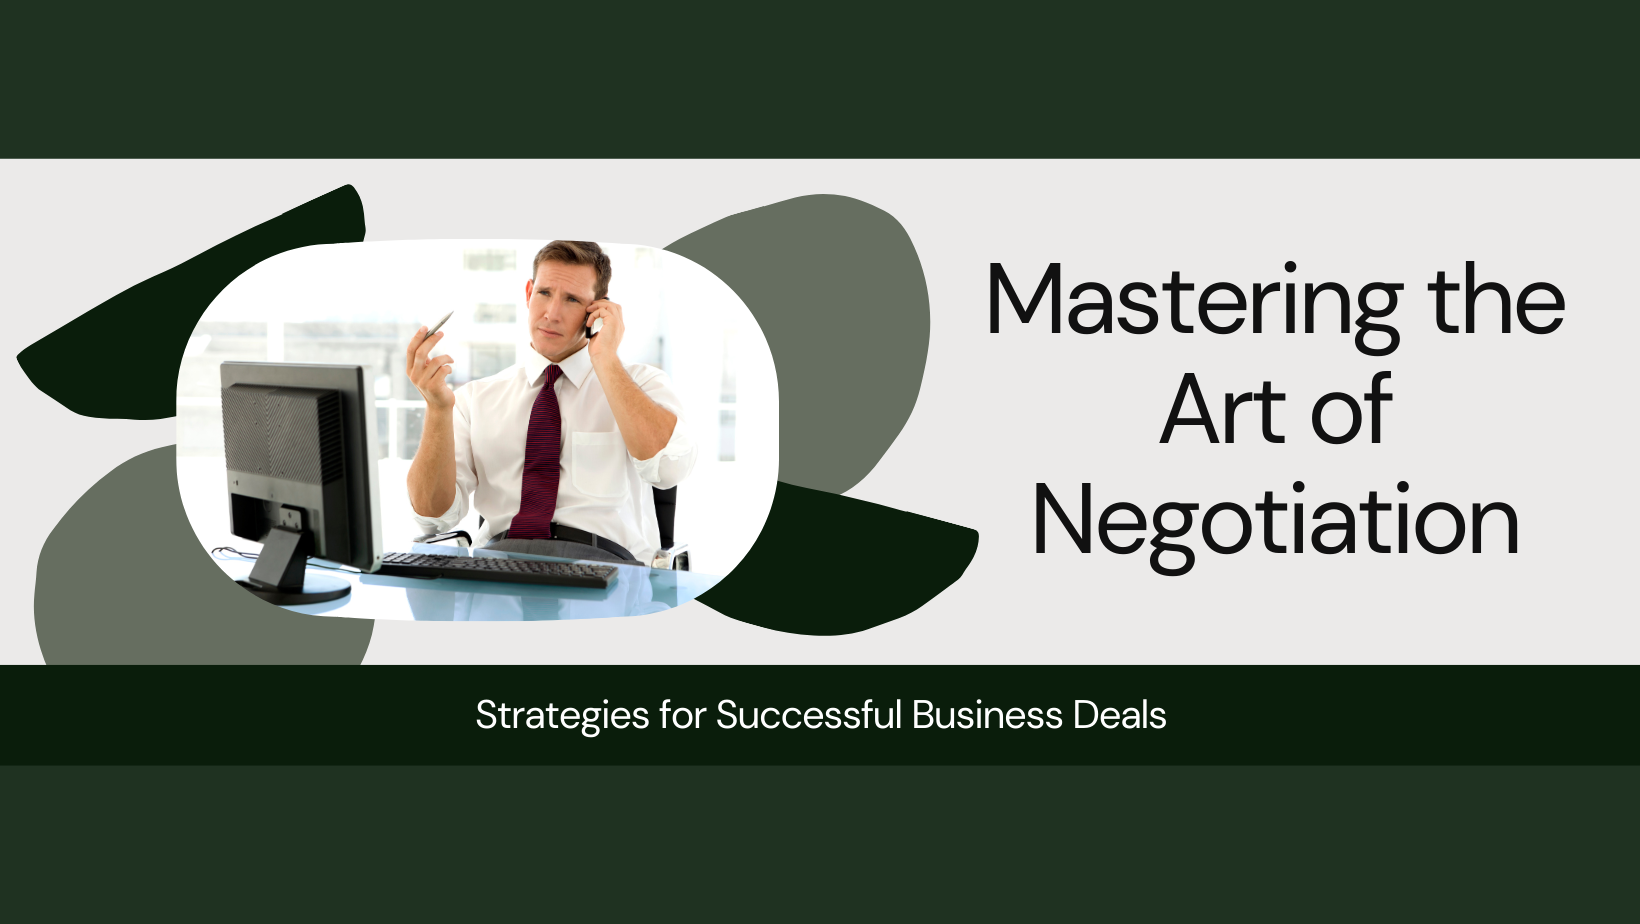 The Art of Negotiation: Securing Successful Business Deals